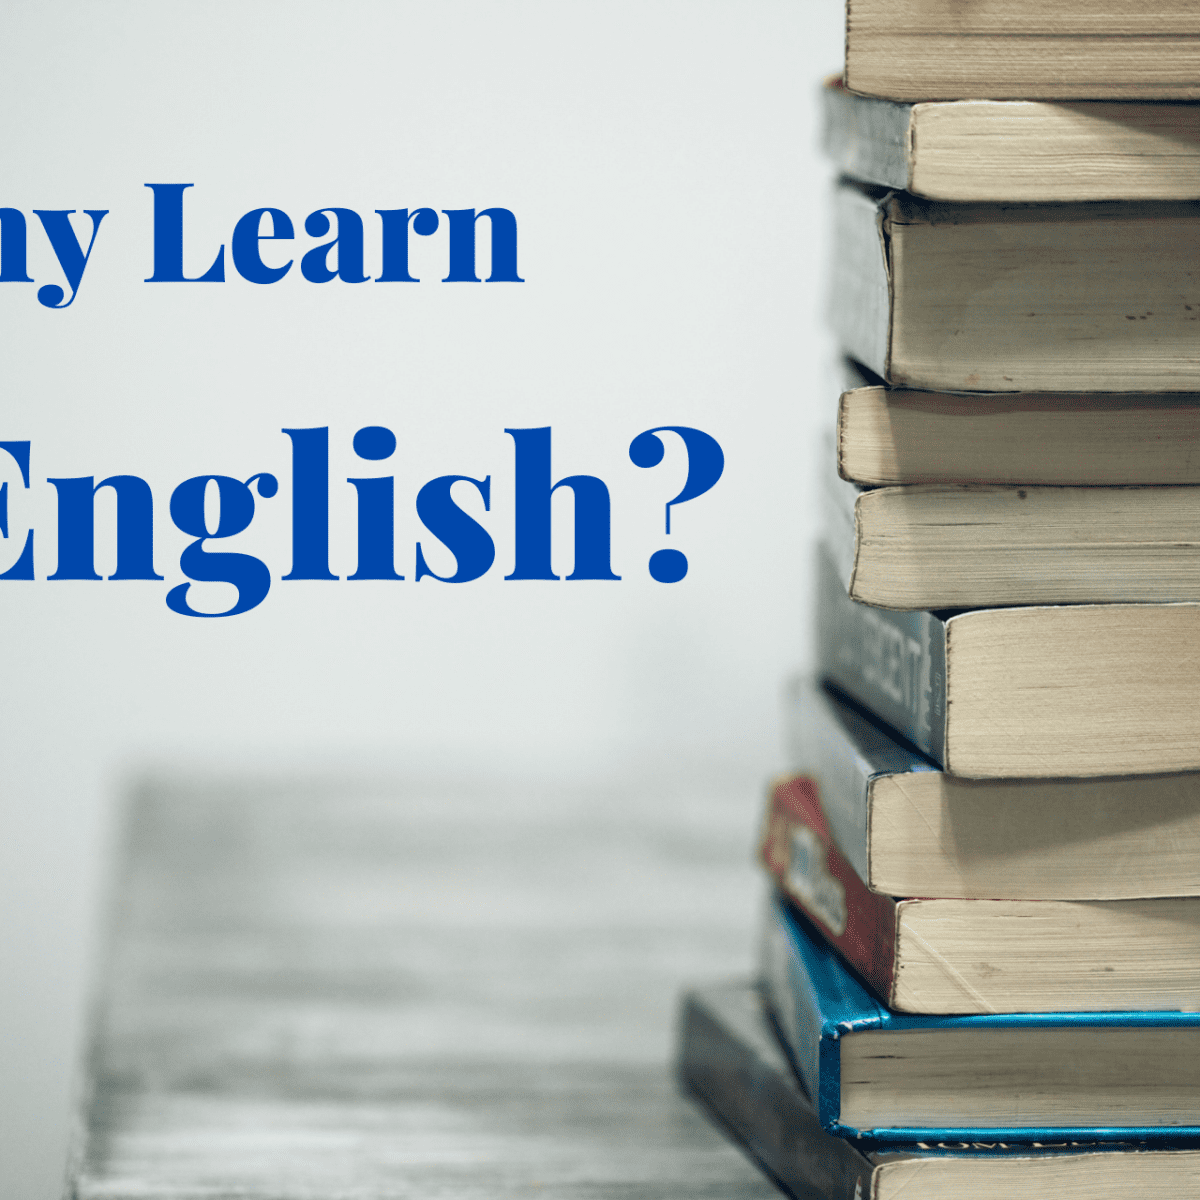 the importance of english language for students